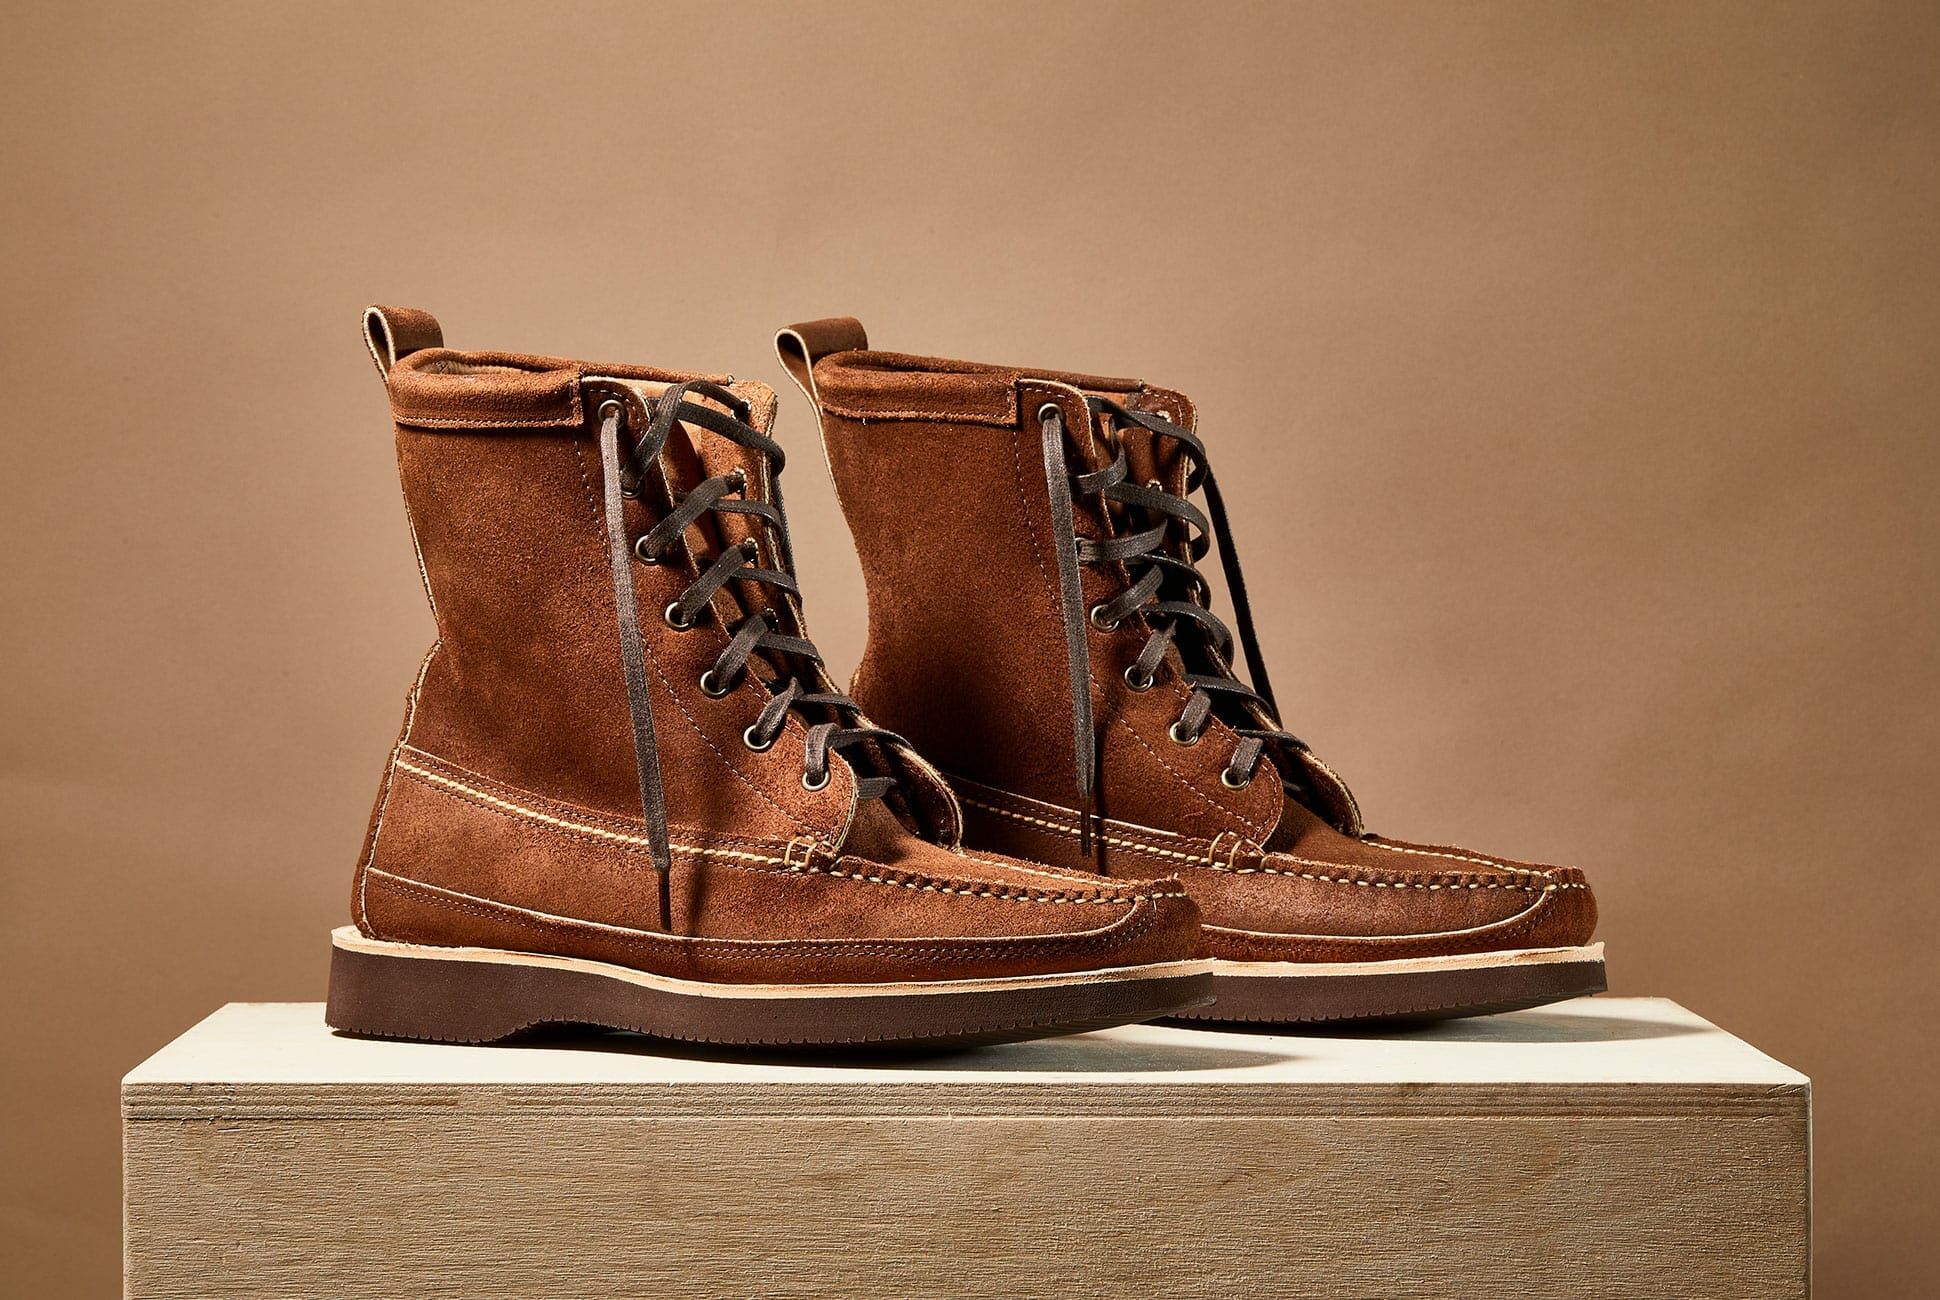 Story Behind a New American-Made Boot Brand